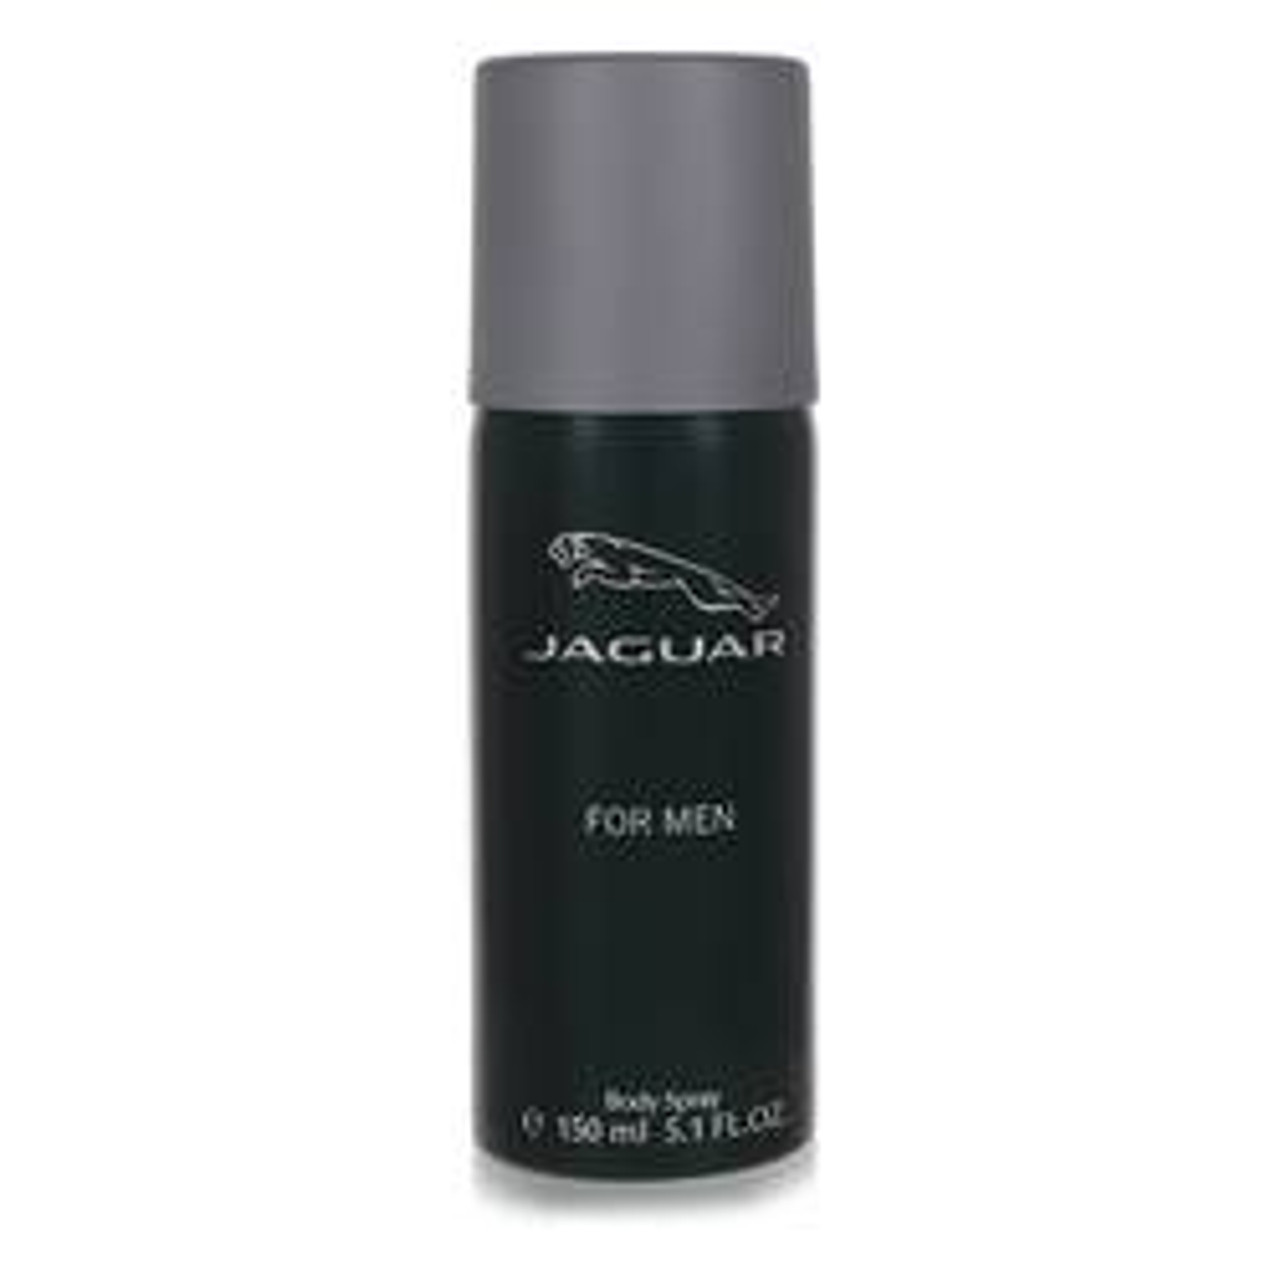 Jaguar Cologne By Jaguar Body Spray 5 oz for Men - [From 27.00 - Choose pk Qty ] - *Ships from Miami